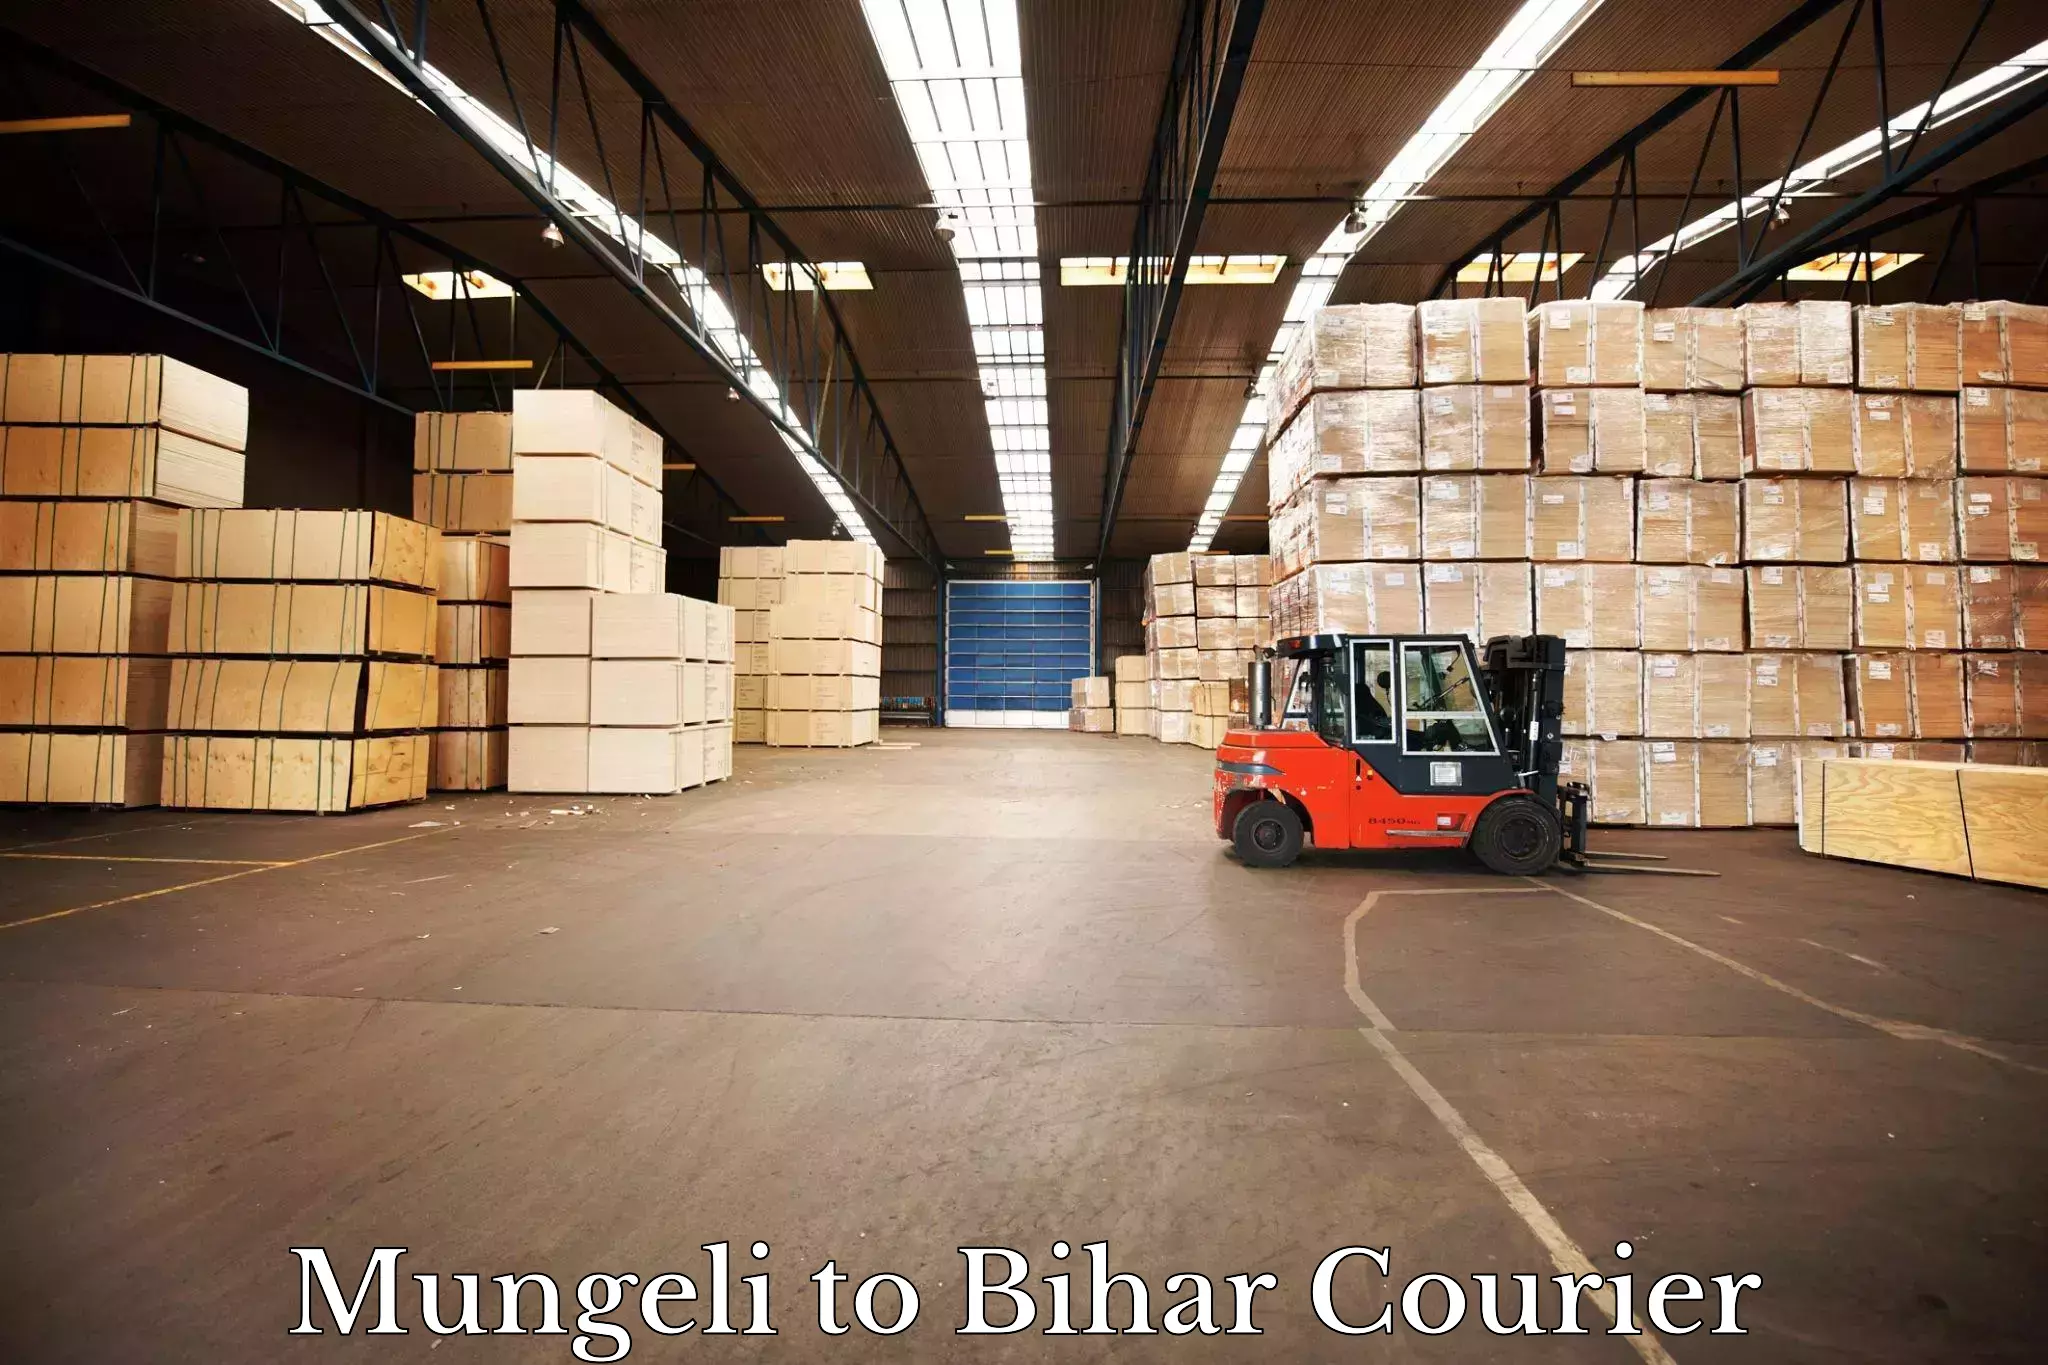 Package delivery network Mungeli to Bihar